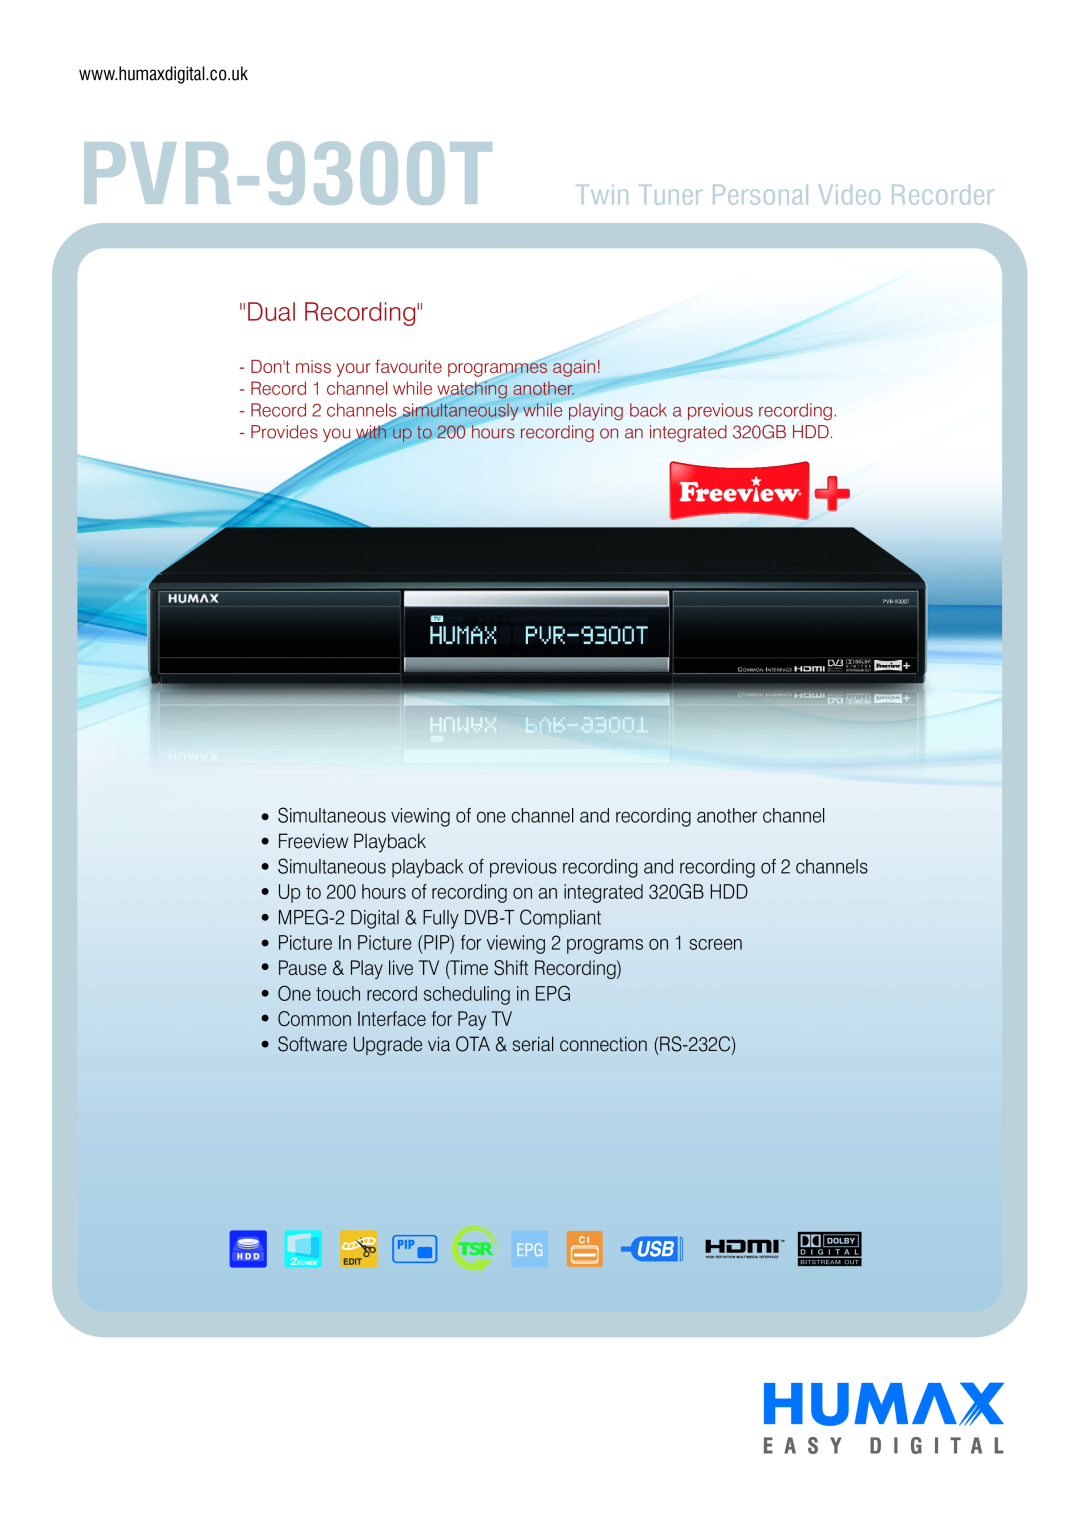 Humax manual PVR-9300T Twin Tuner Personal Video Recorder, Dual Recording 